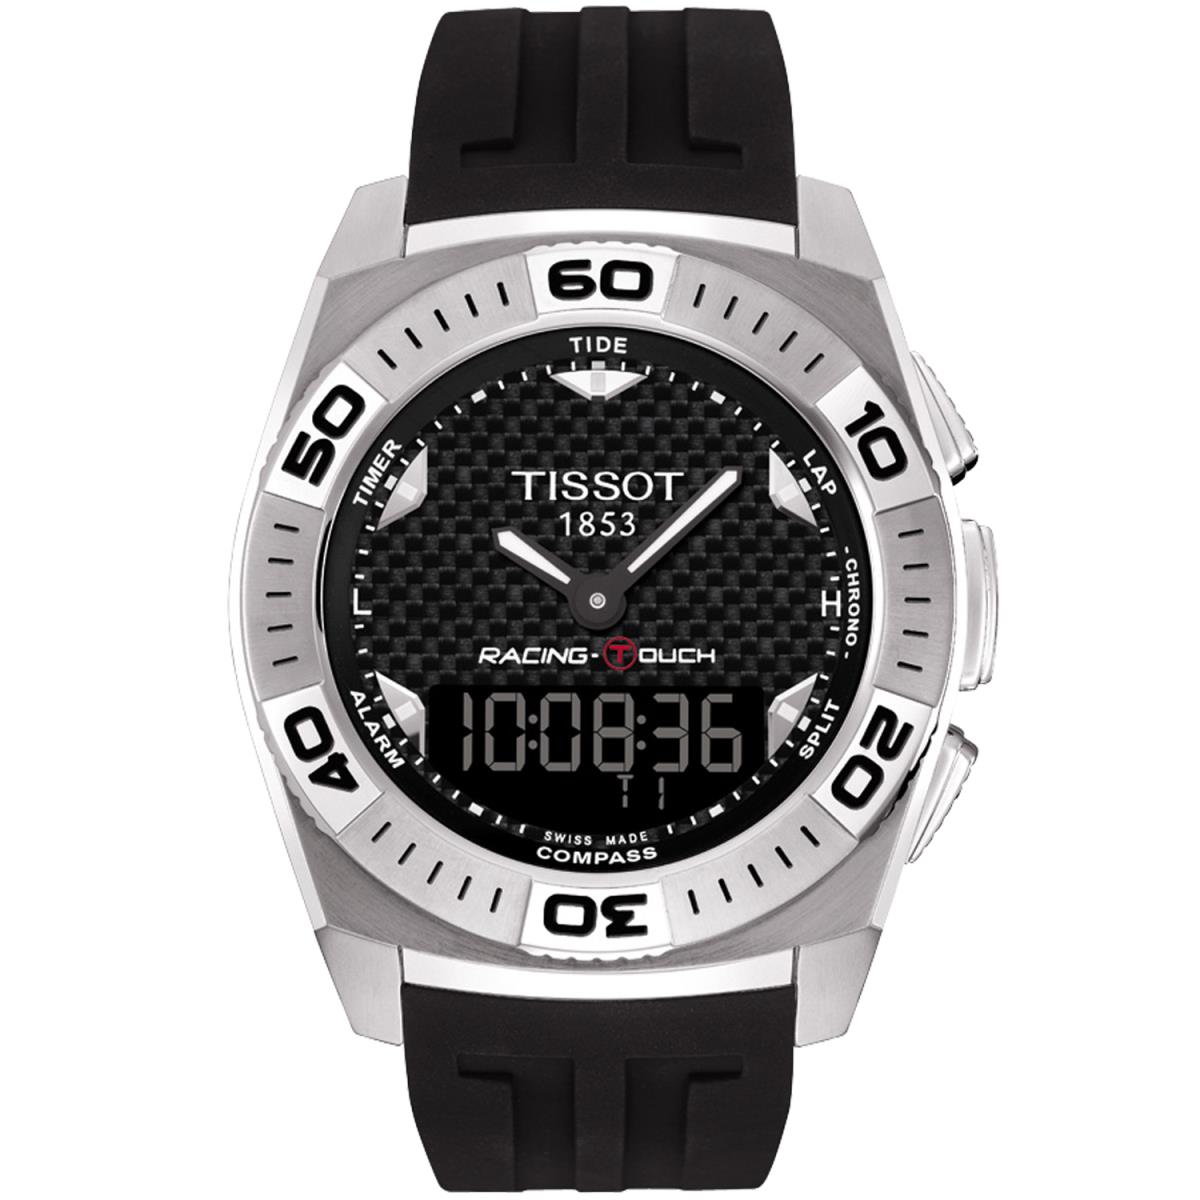 Tissot Racing-touch Black Rubber Digital Analog Swiss Made Watch T0025201720101